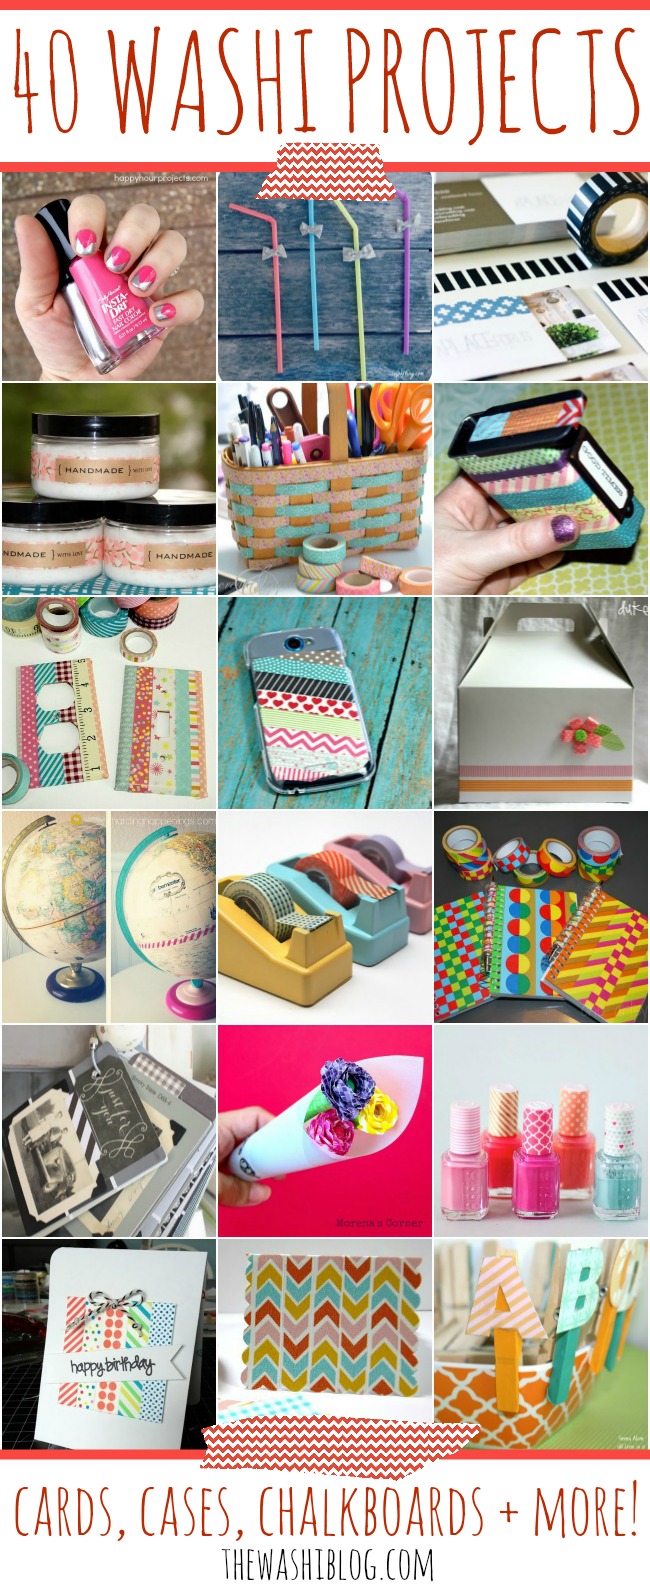 40 Washi Tape Projects – Cards, Cases, Chalkboards and More! For more washi projects and inspiration visit thewashiblog.com | #washi #washitape